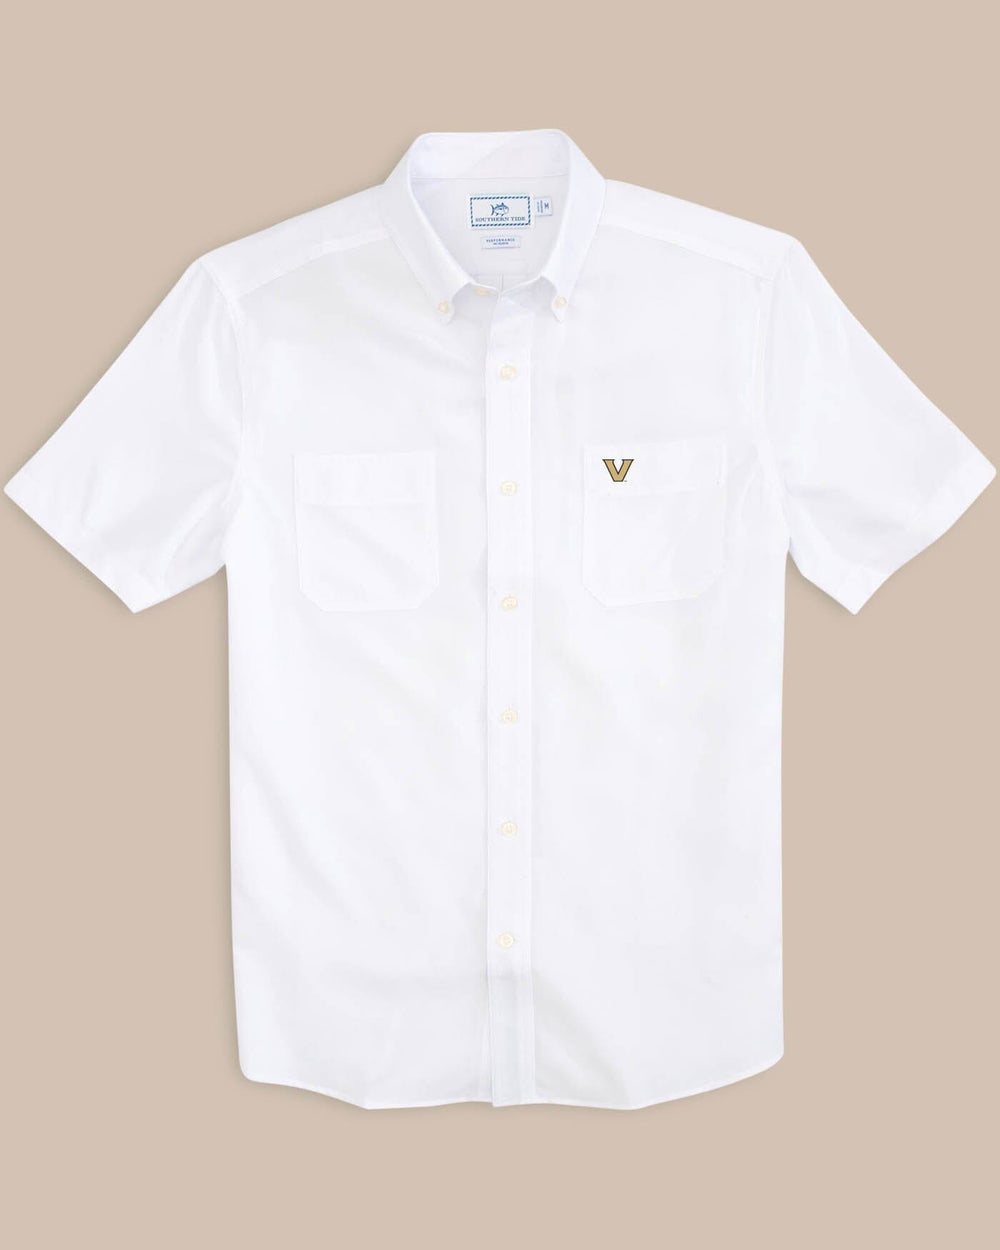 The front view of the Vanderbilt Commodores Short Sleeve Button Down Dock Shirt by Southern Tide - Classic White